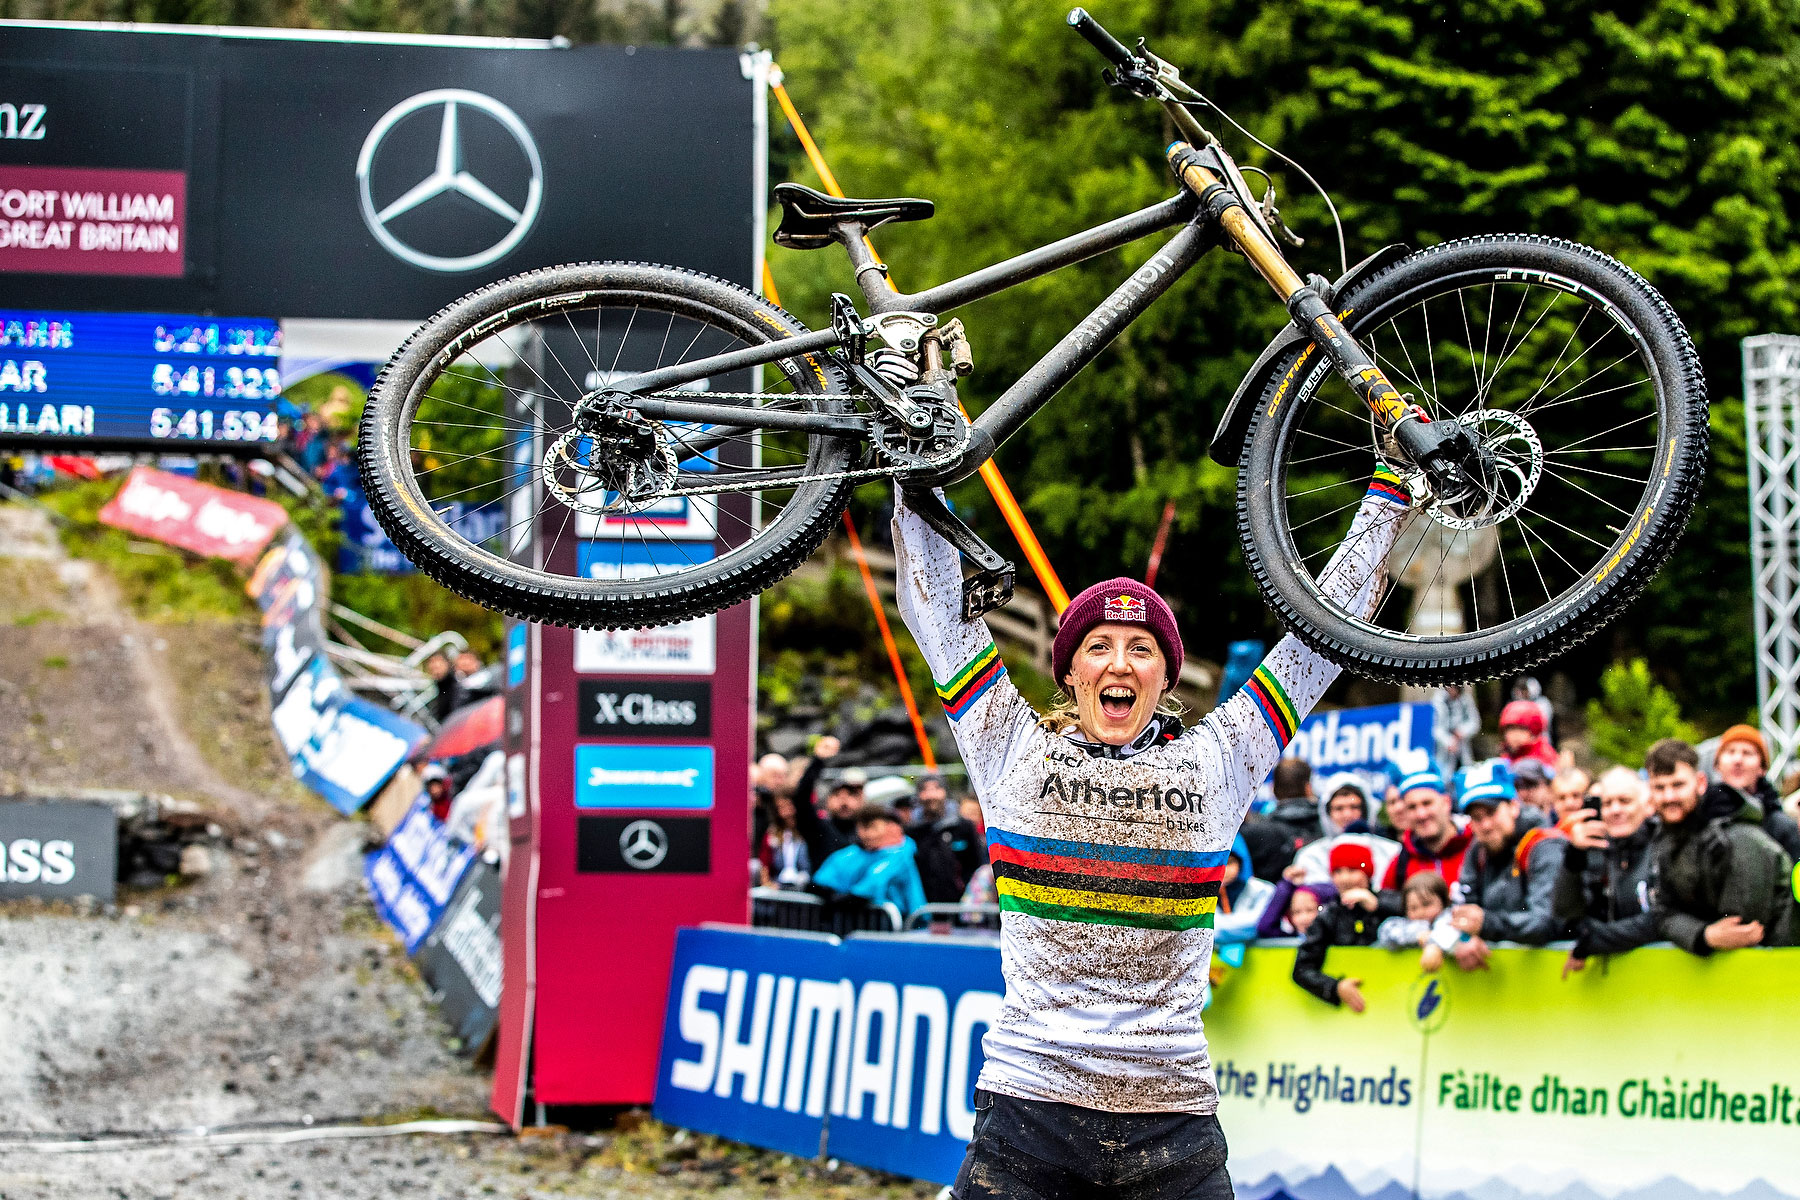 Happy 5th Birthday to Atherton Bikes: Rachel Atherton first World Cup win on family bike Ft. Bill 2019